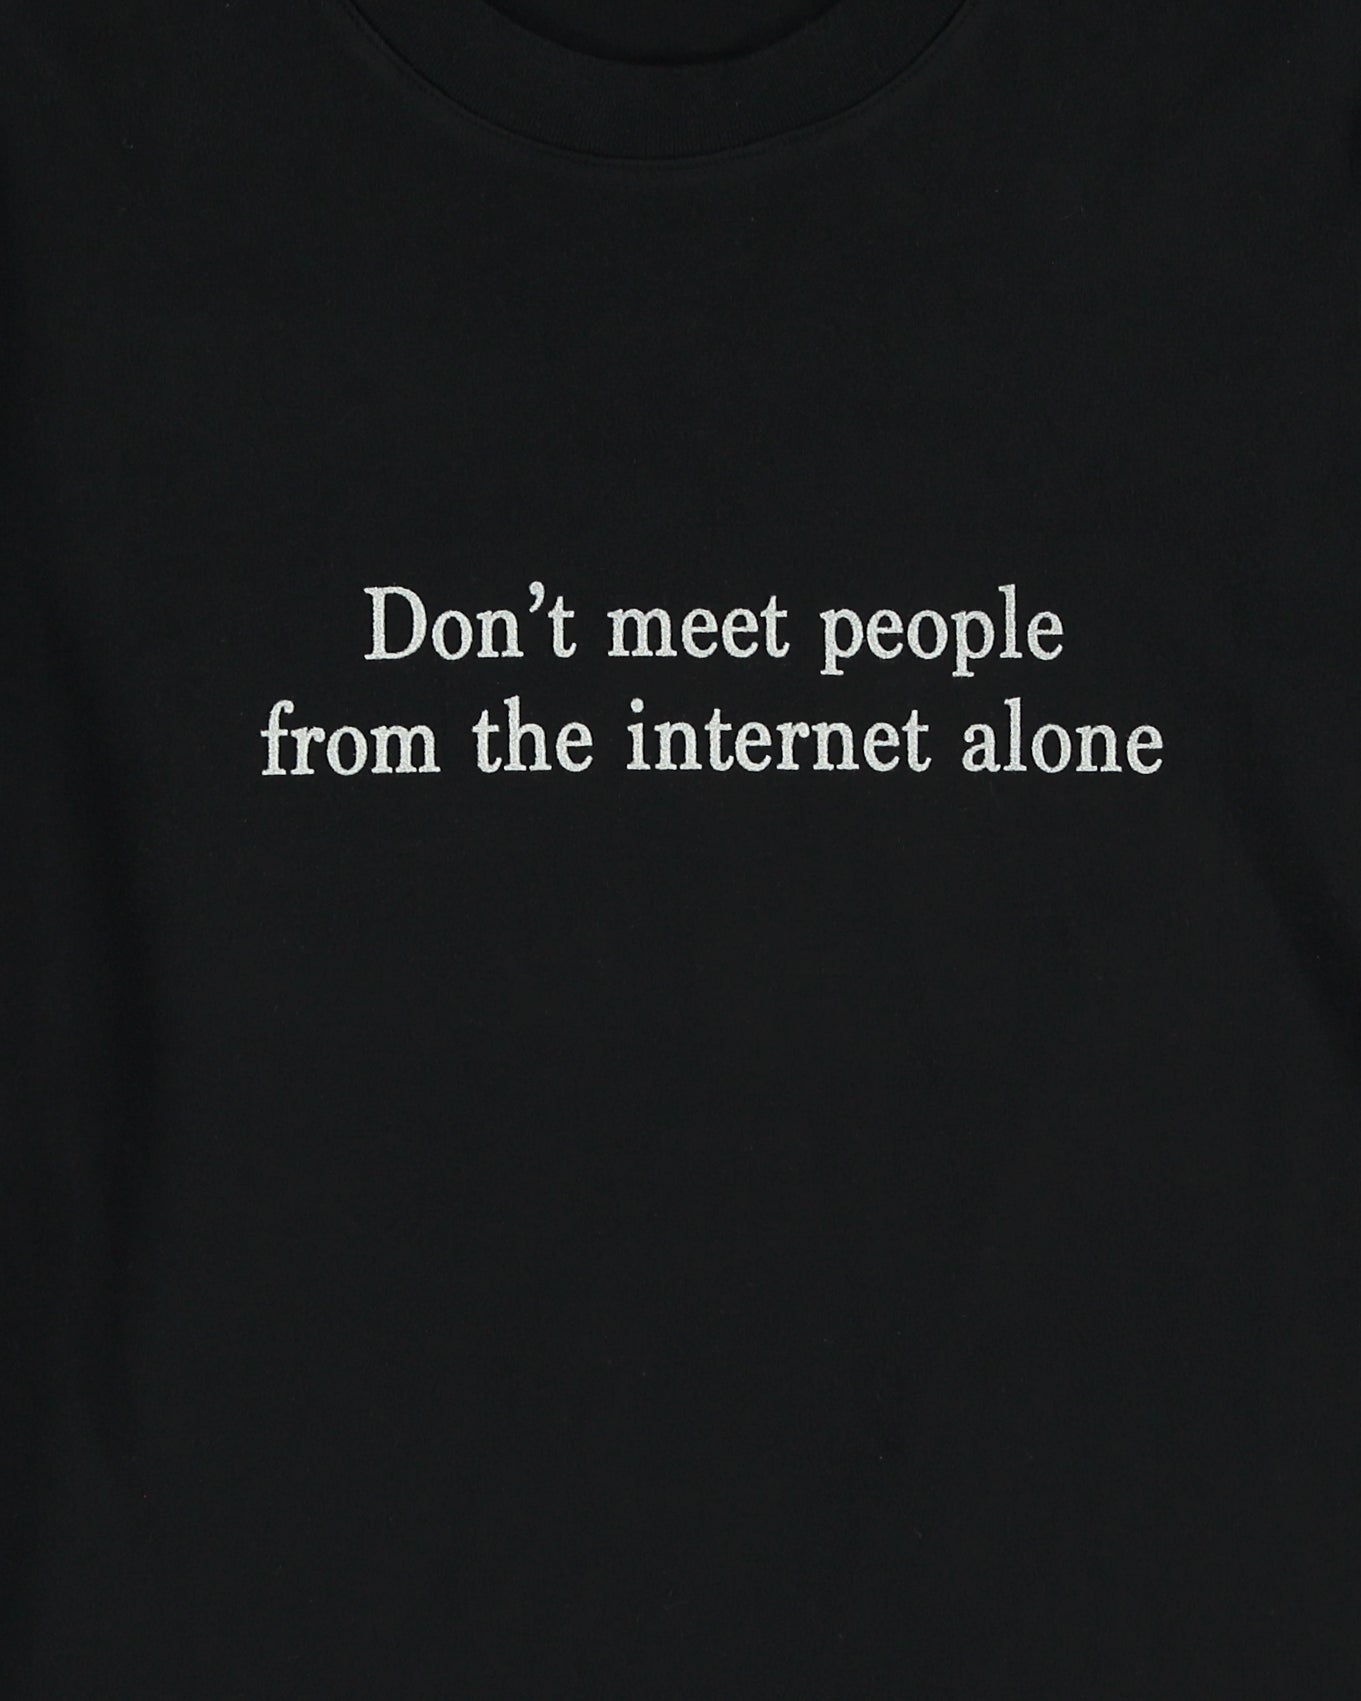 DON'T MEET PEOPLE FROM THE INTERNET ALONE Jude t-shirt Black - Local Pattern